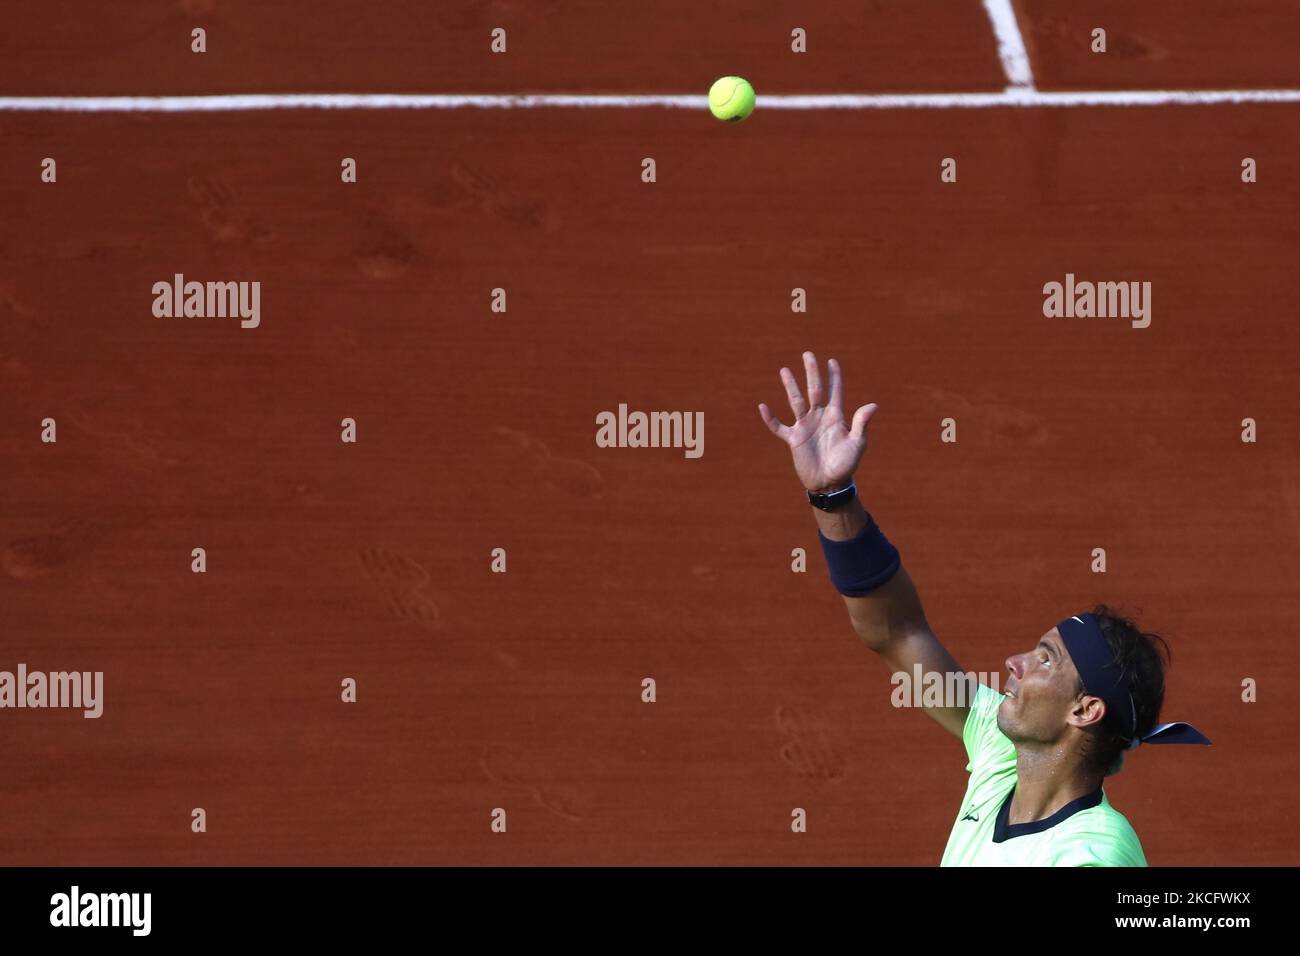 Spain's Rafael Nadal plays against Argentina's Diego Schwartzman during their men's singles quarter-final tennis match on Day 11 of The Roland Garros 2021 French Open tennis tournament in Paris, France on June 9, 2021.(Photo by Mehdi Taamallah/NurPhoto) Stock Photo